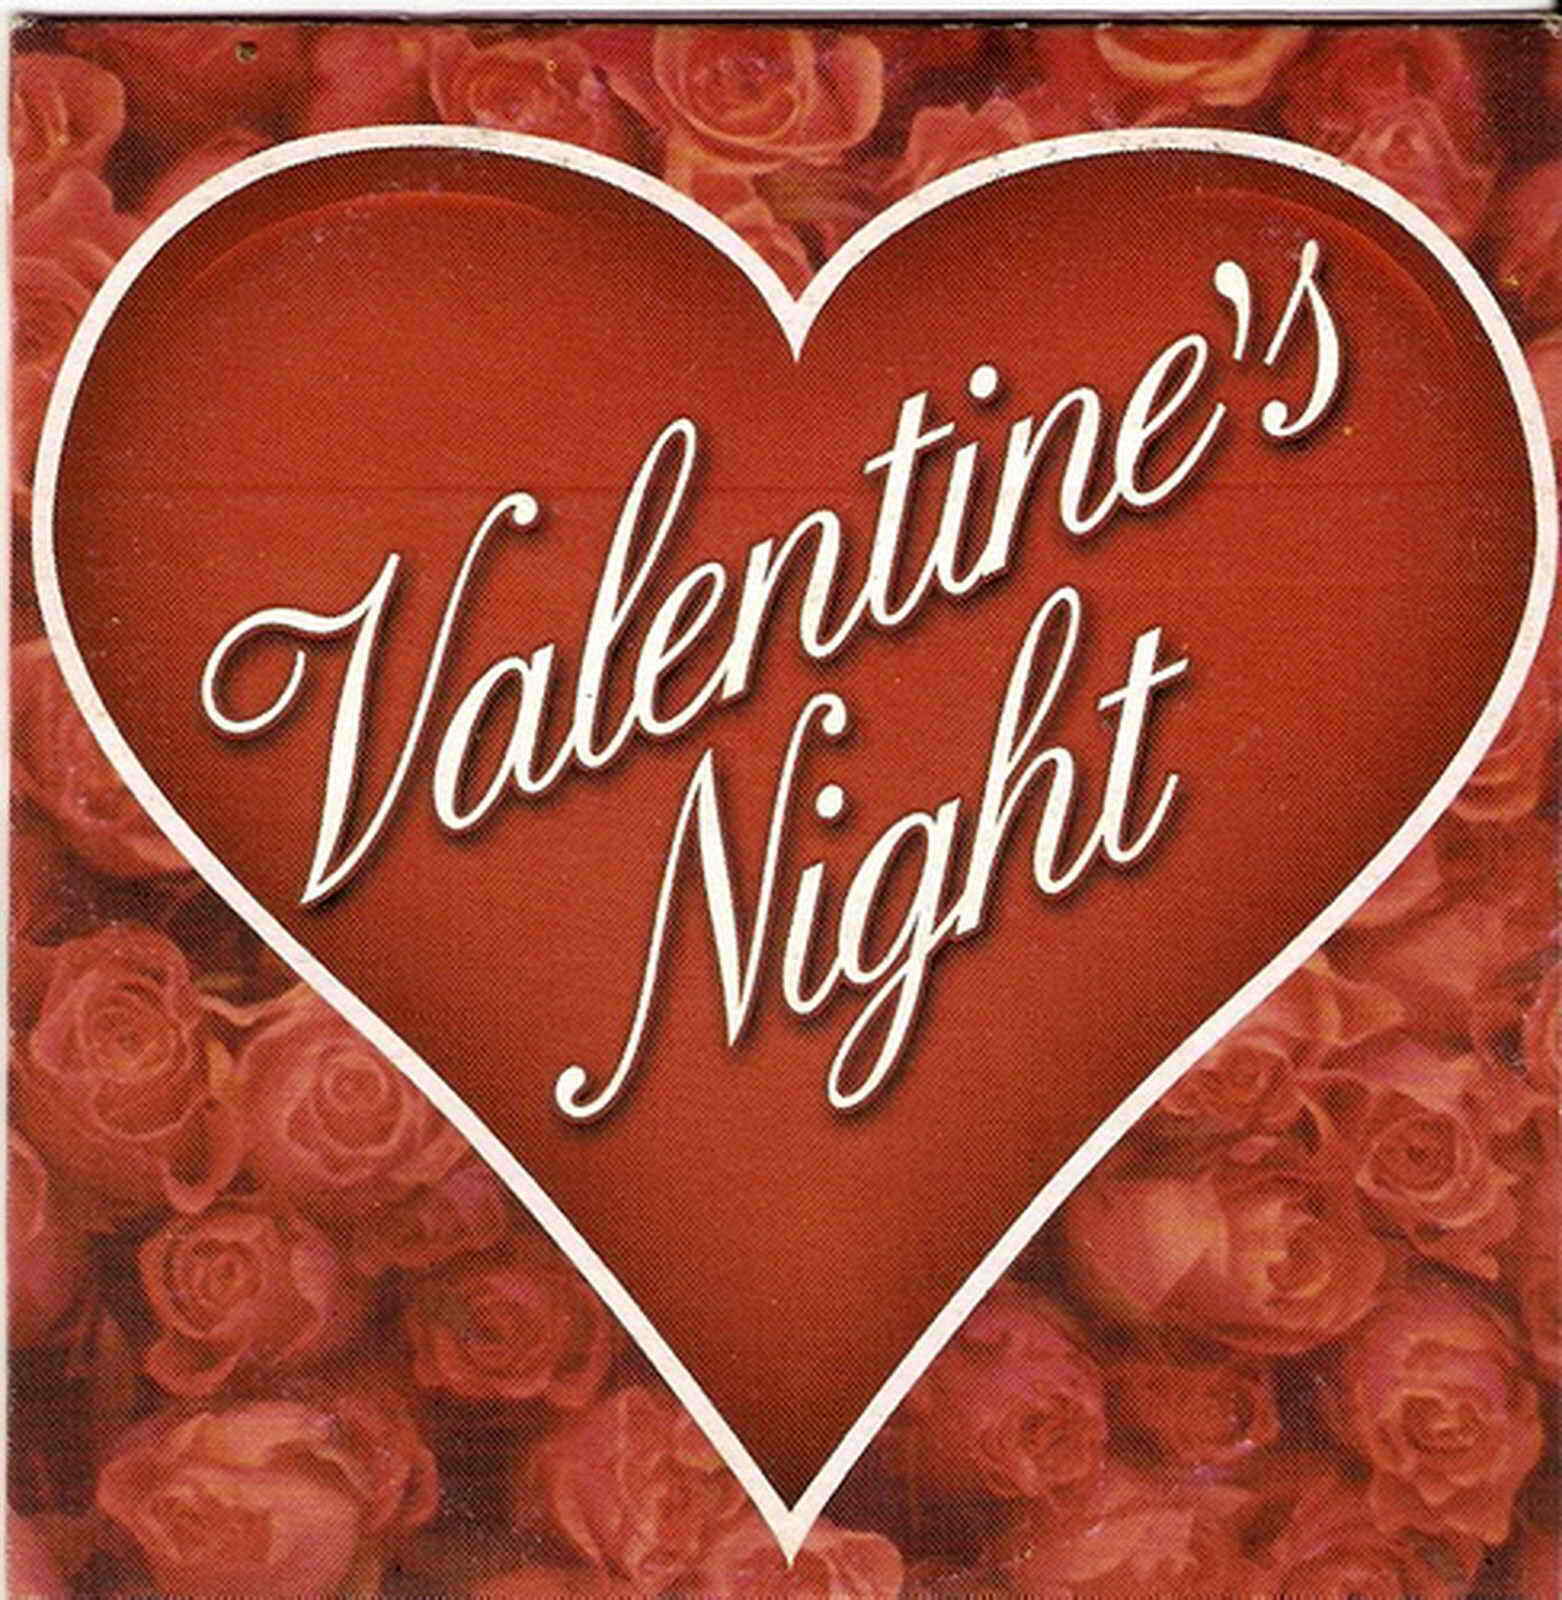 Primary image for various 10 Love songs for VALENTINE'S NIGHT CD